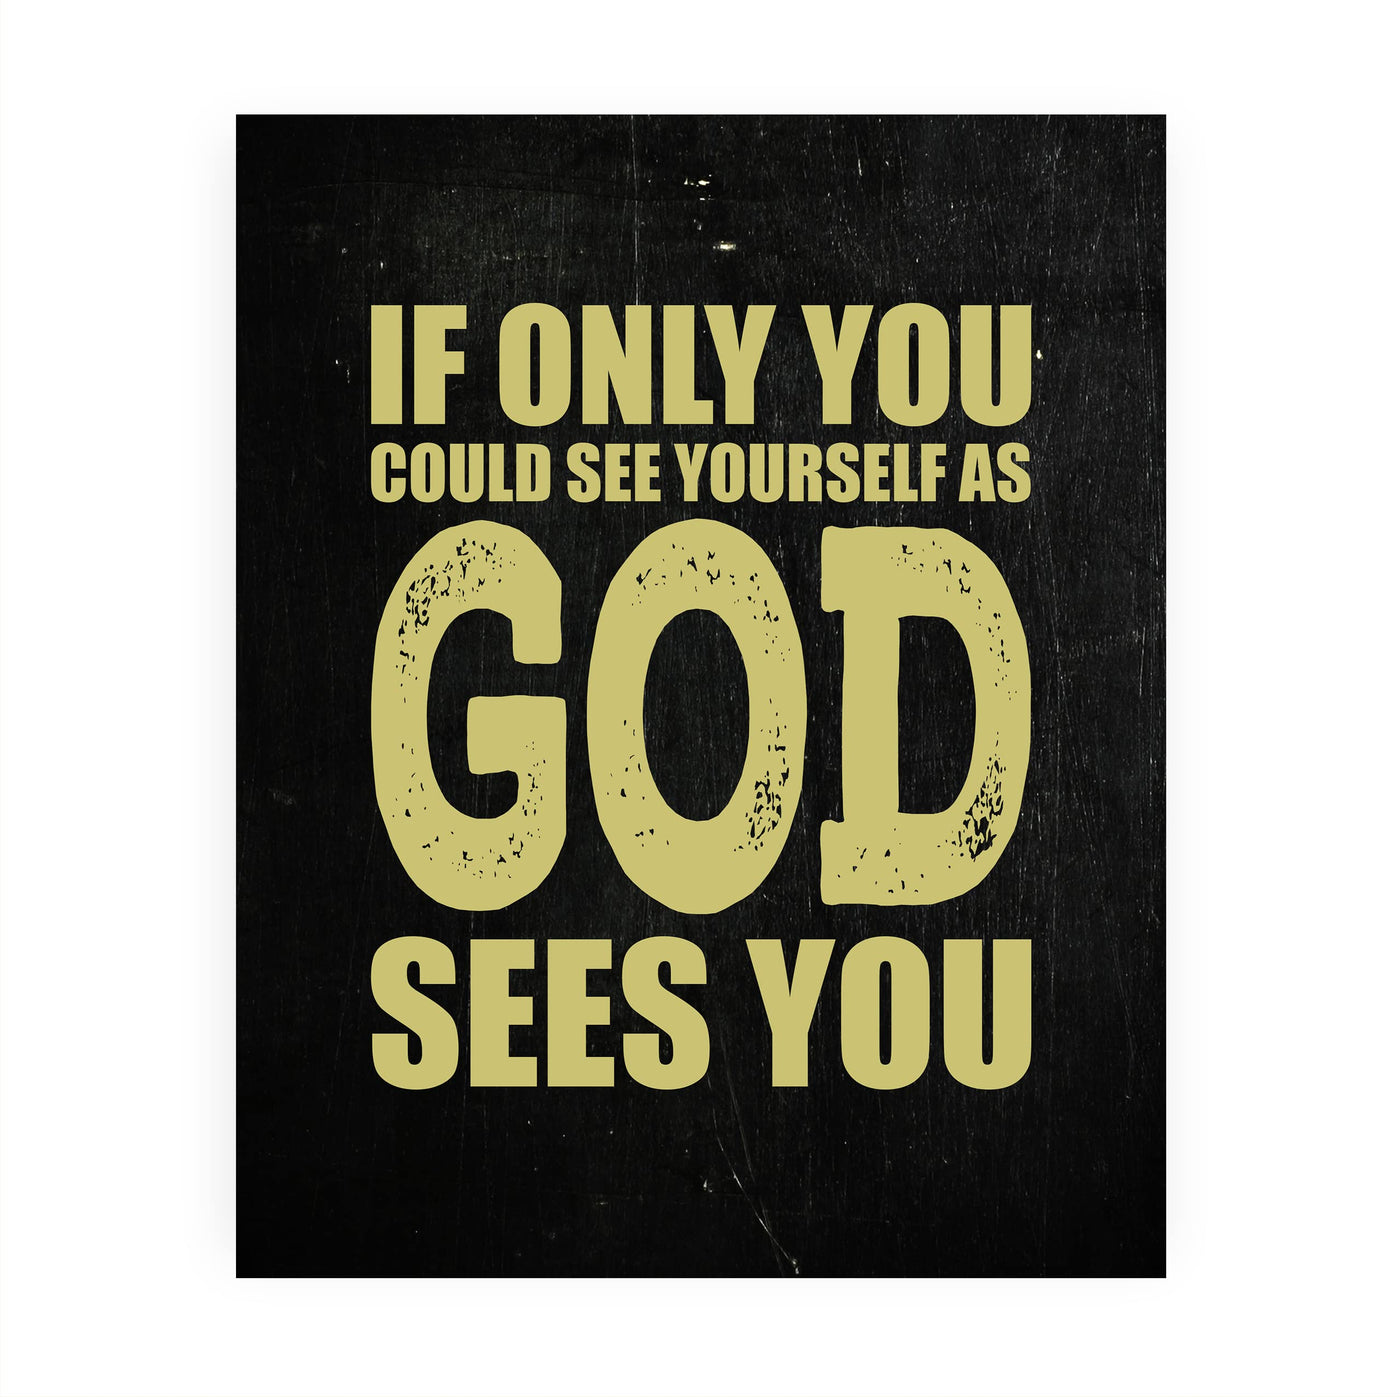 If You Could See Yourself As God Sees You Inspirational Wall Print-8 x 10" Rustic Typographic Design-Ready to Frame. Christian Wall Art for Home-Office-Church Decor. Great Gift & Reminder of Faith!